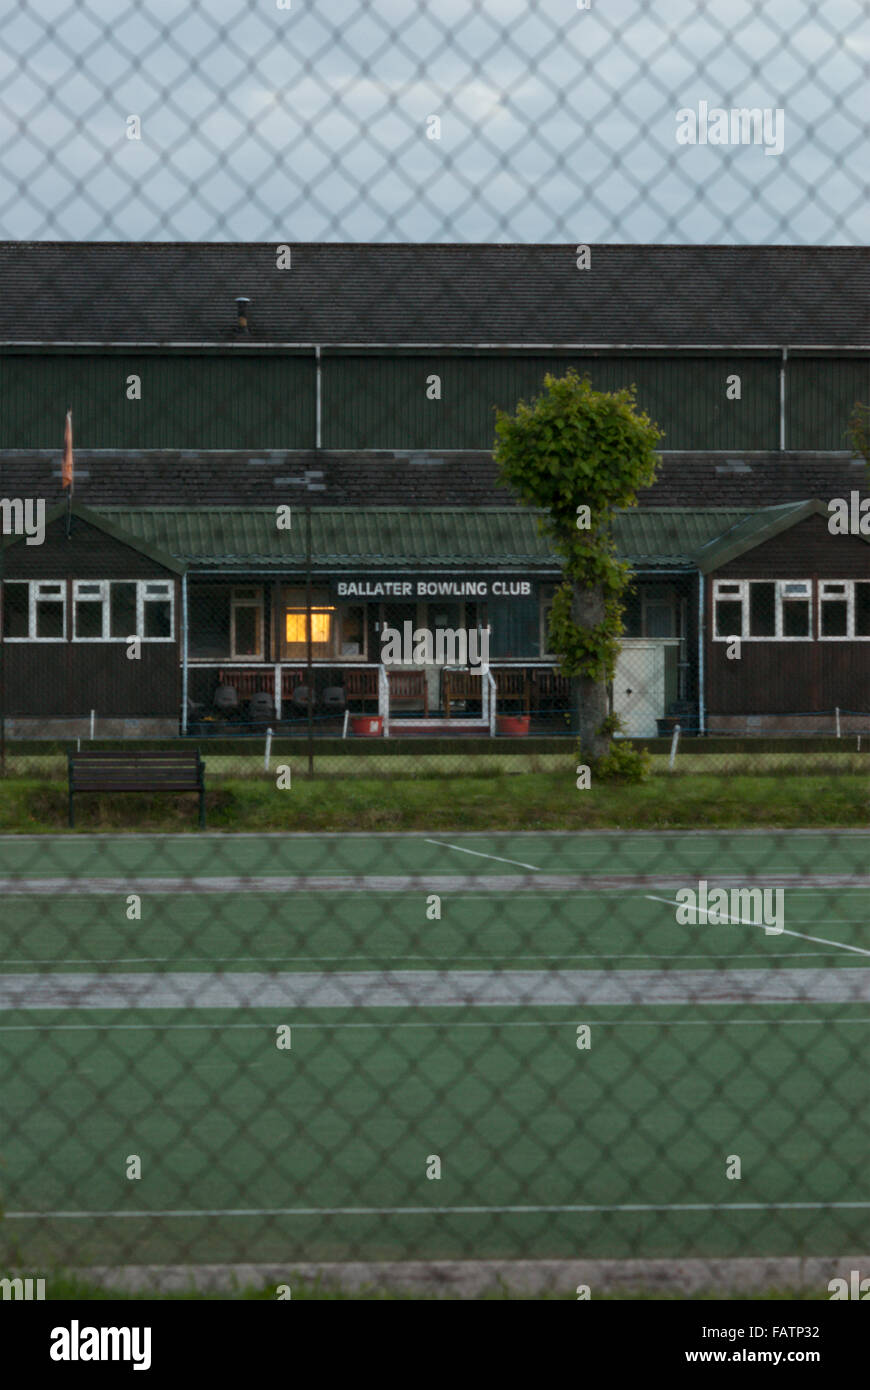 Looking across tennis courts and bowling green to Ballater Bowling Club clubhouse. Stock Photo